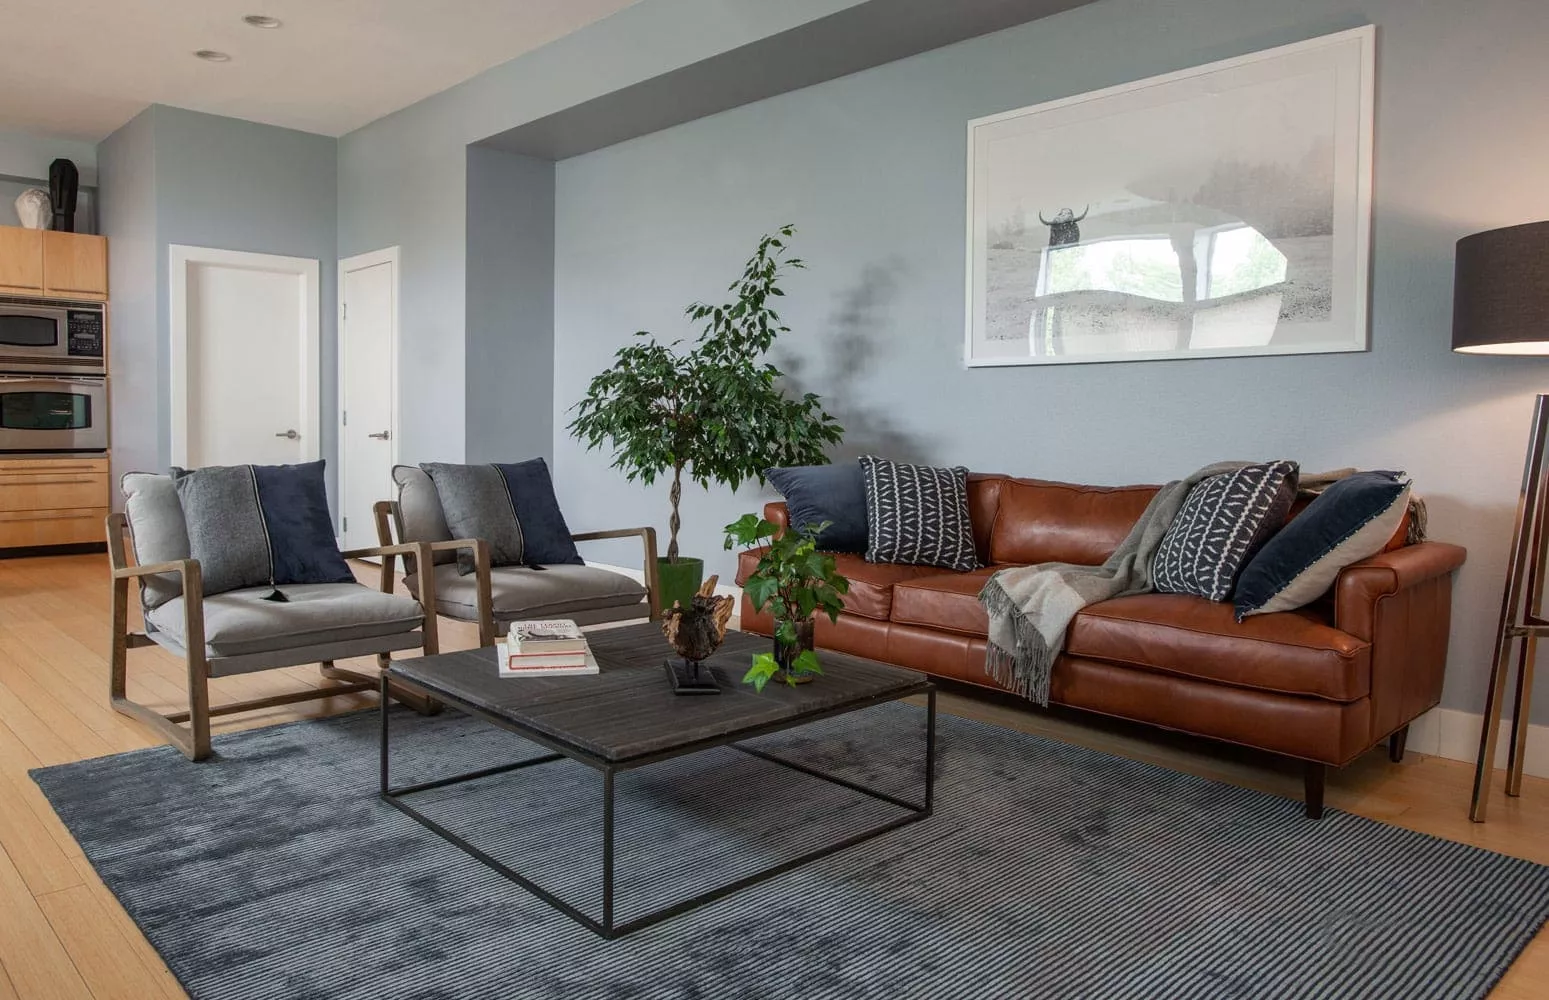 Beautiful brown leather sofa in livingroom deorated in shades of gray